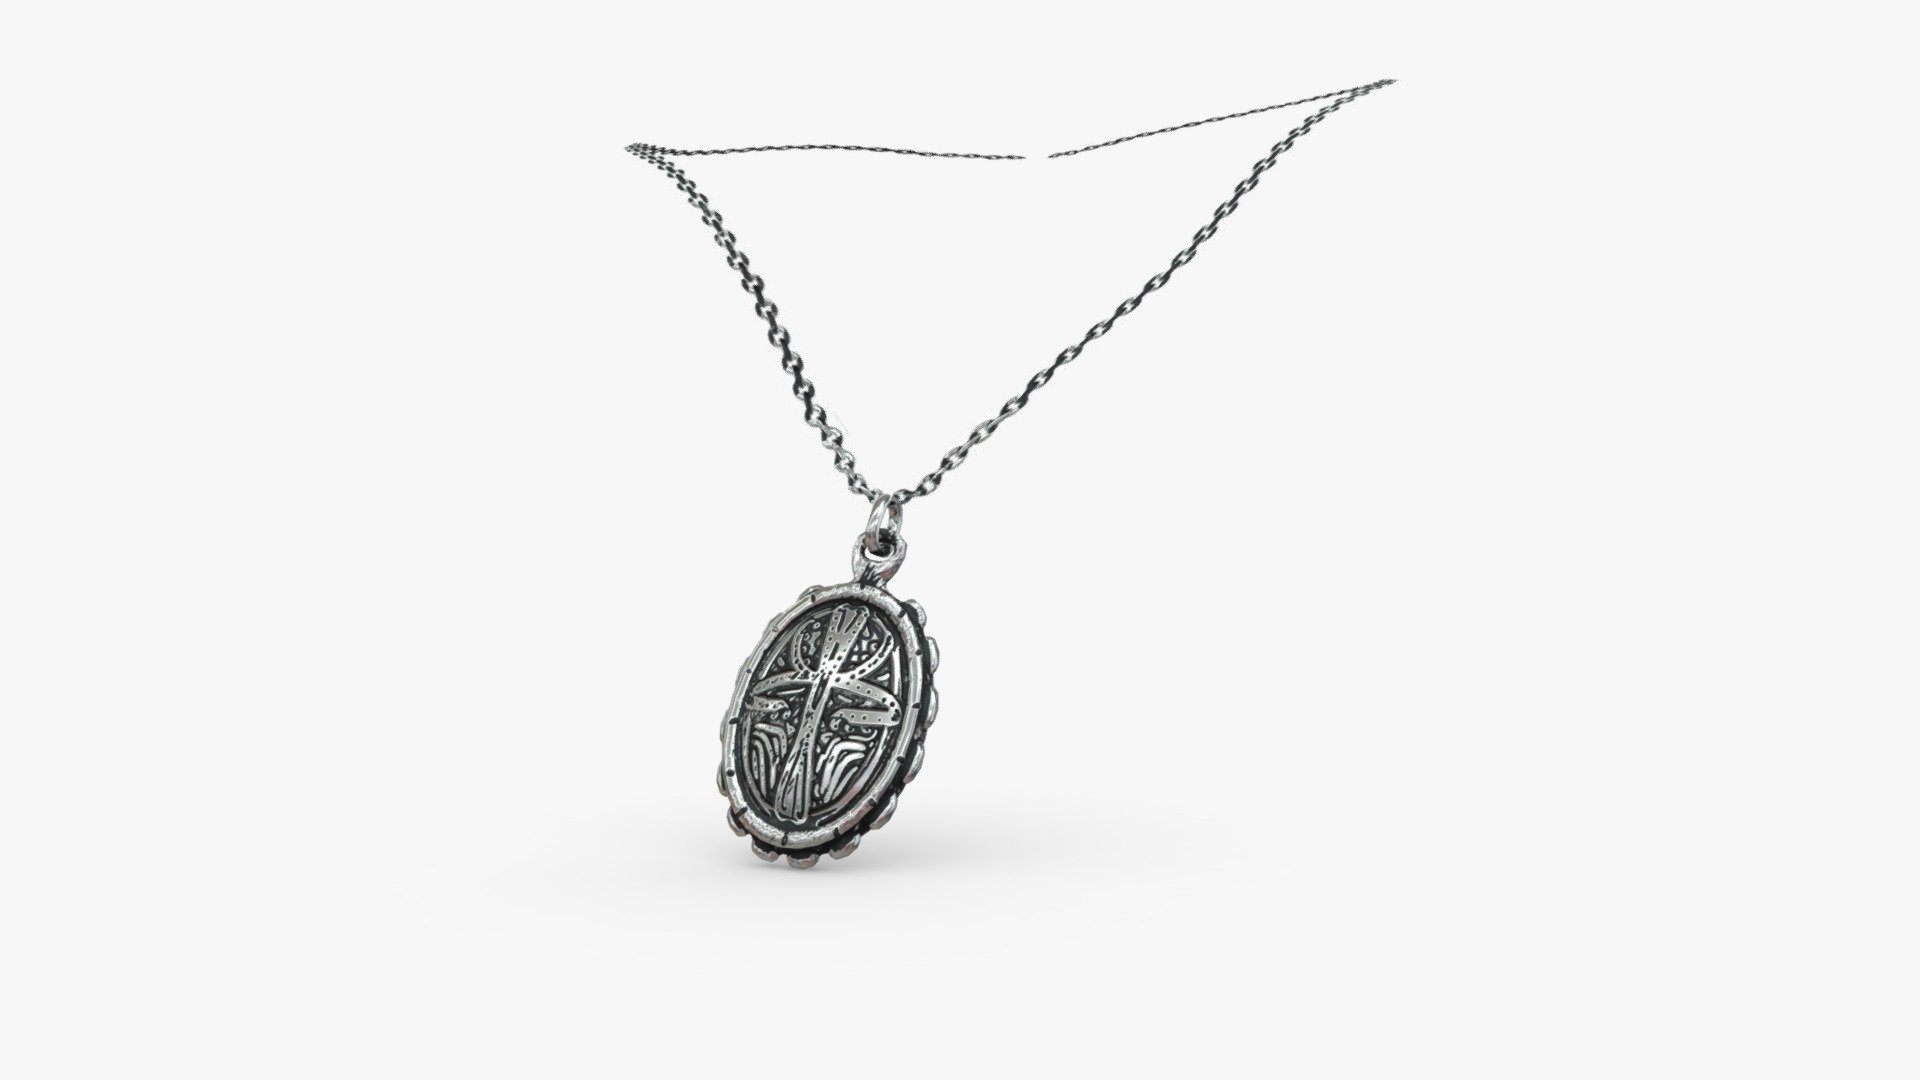 Check out my website for more products and better deals! &amp;gt;&amp;gt; SM5 by Heledahn &amp;lt;&amp;lt;


This is a digital 3d model of an antique or medieval style silver locket or medalion. The necklace is hanging from a silver chain, that wraps nicely around the character's neck. The medalion has a beautiful design, damaged by use and heavily weathered with dirt and scratches. The geometry of this object is simple, to allow easy animation and rigging.

This model can be used for any Medieval/Fantasy themed render project, used either as a background prop, or as a closeup prop due to its high detail and visual quality.

This product will achieve realistic results in your rendering projects and animations, being greatly suited for close-ups due to their high quality topology and PBR shading 3d model